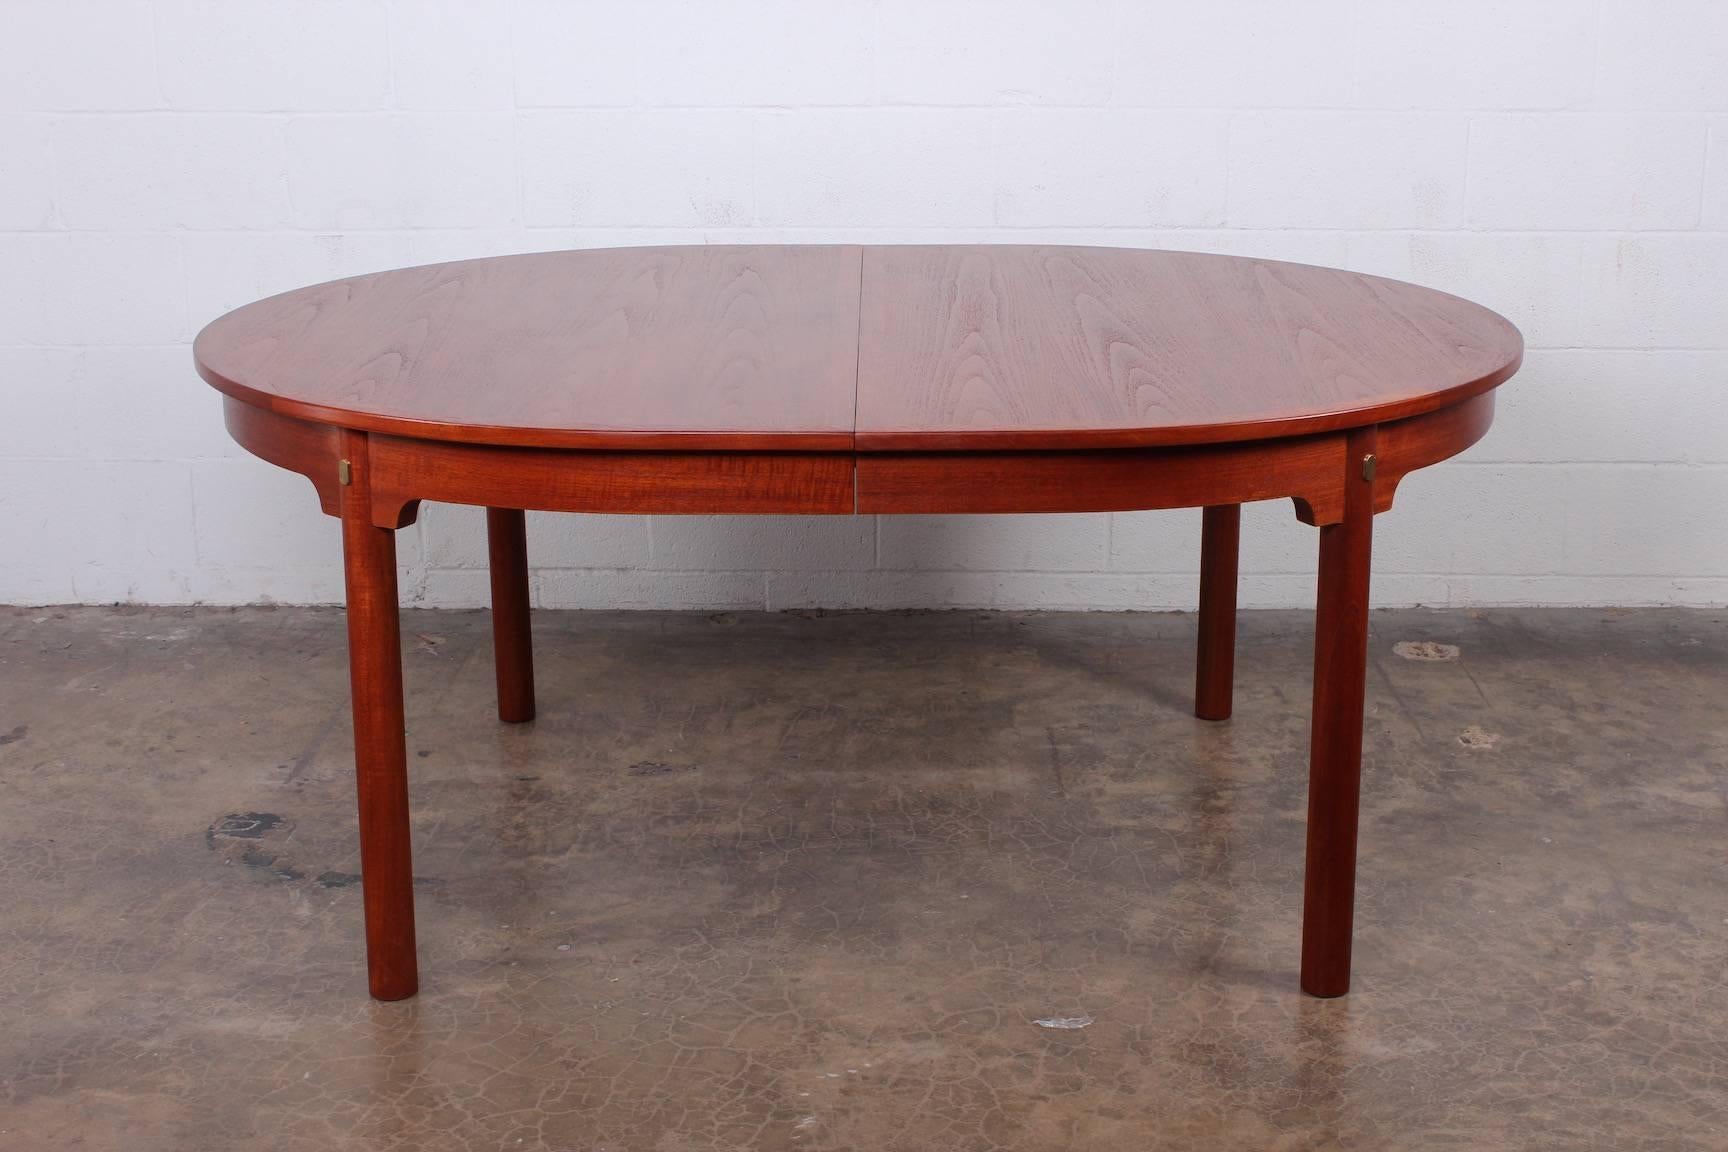 A large teak dining table with brass details. The table measures 66.75